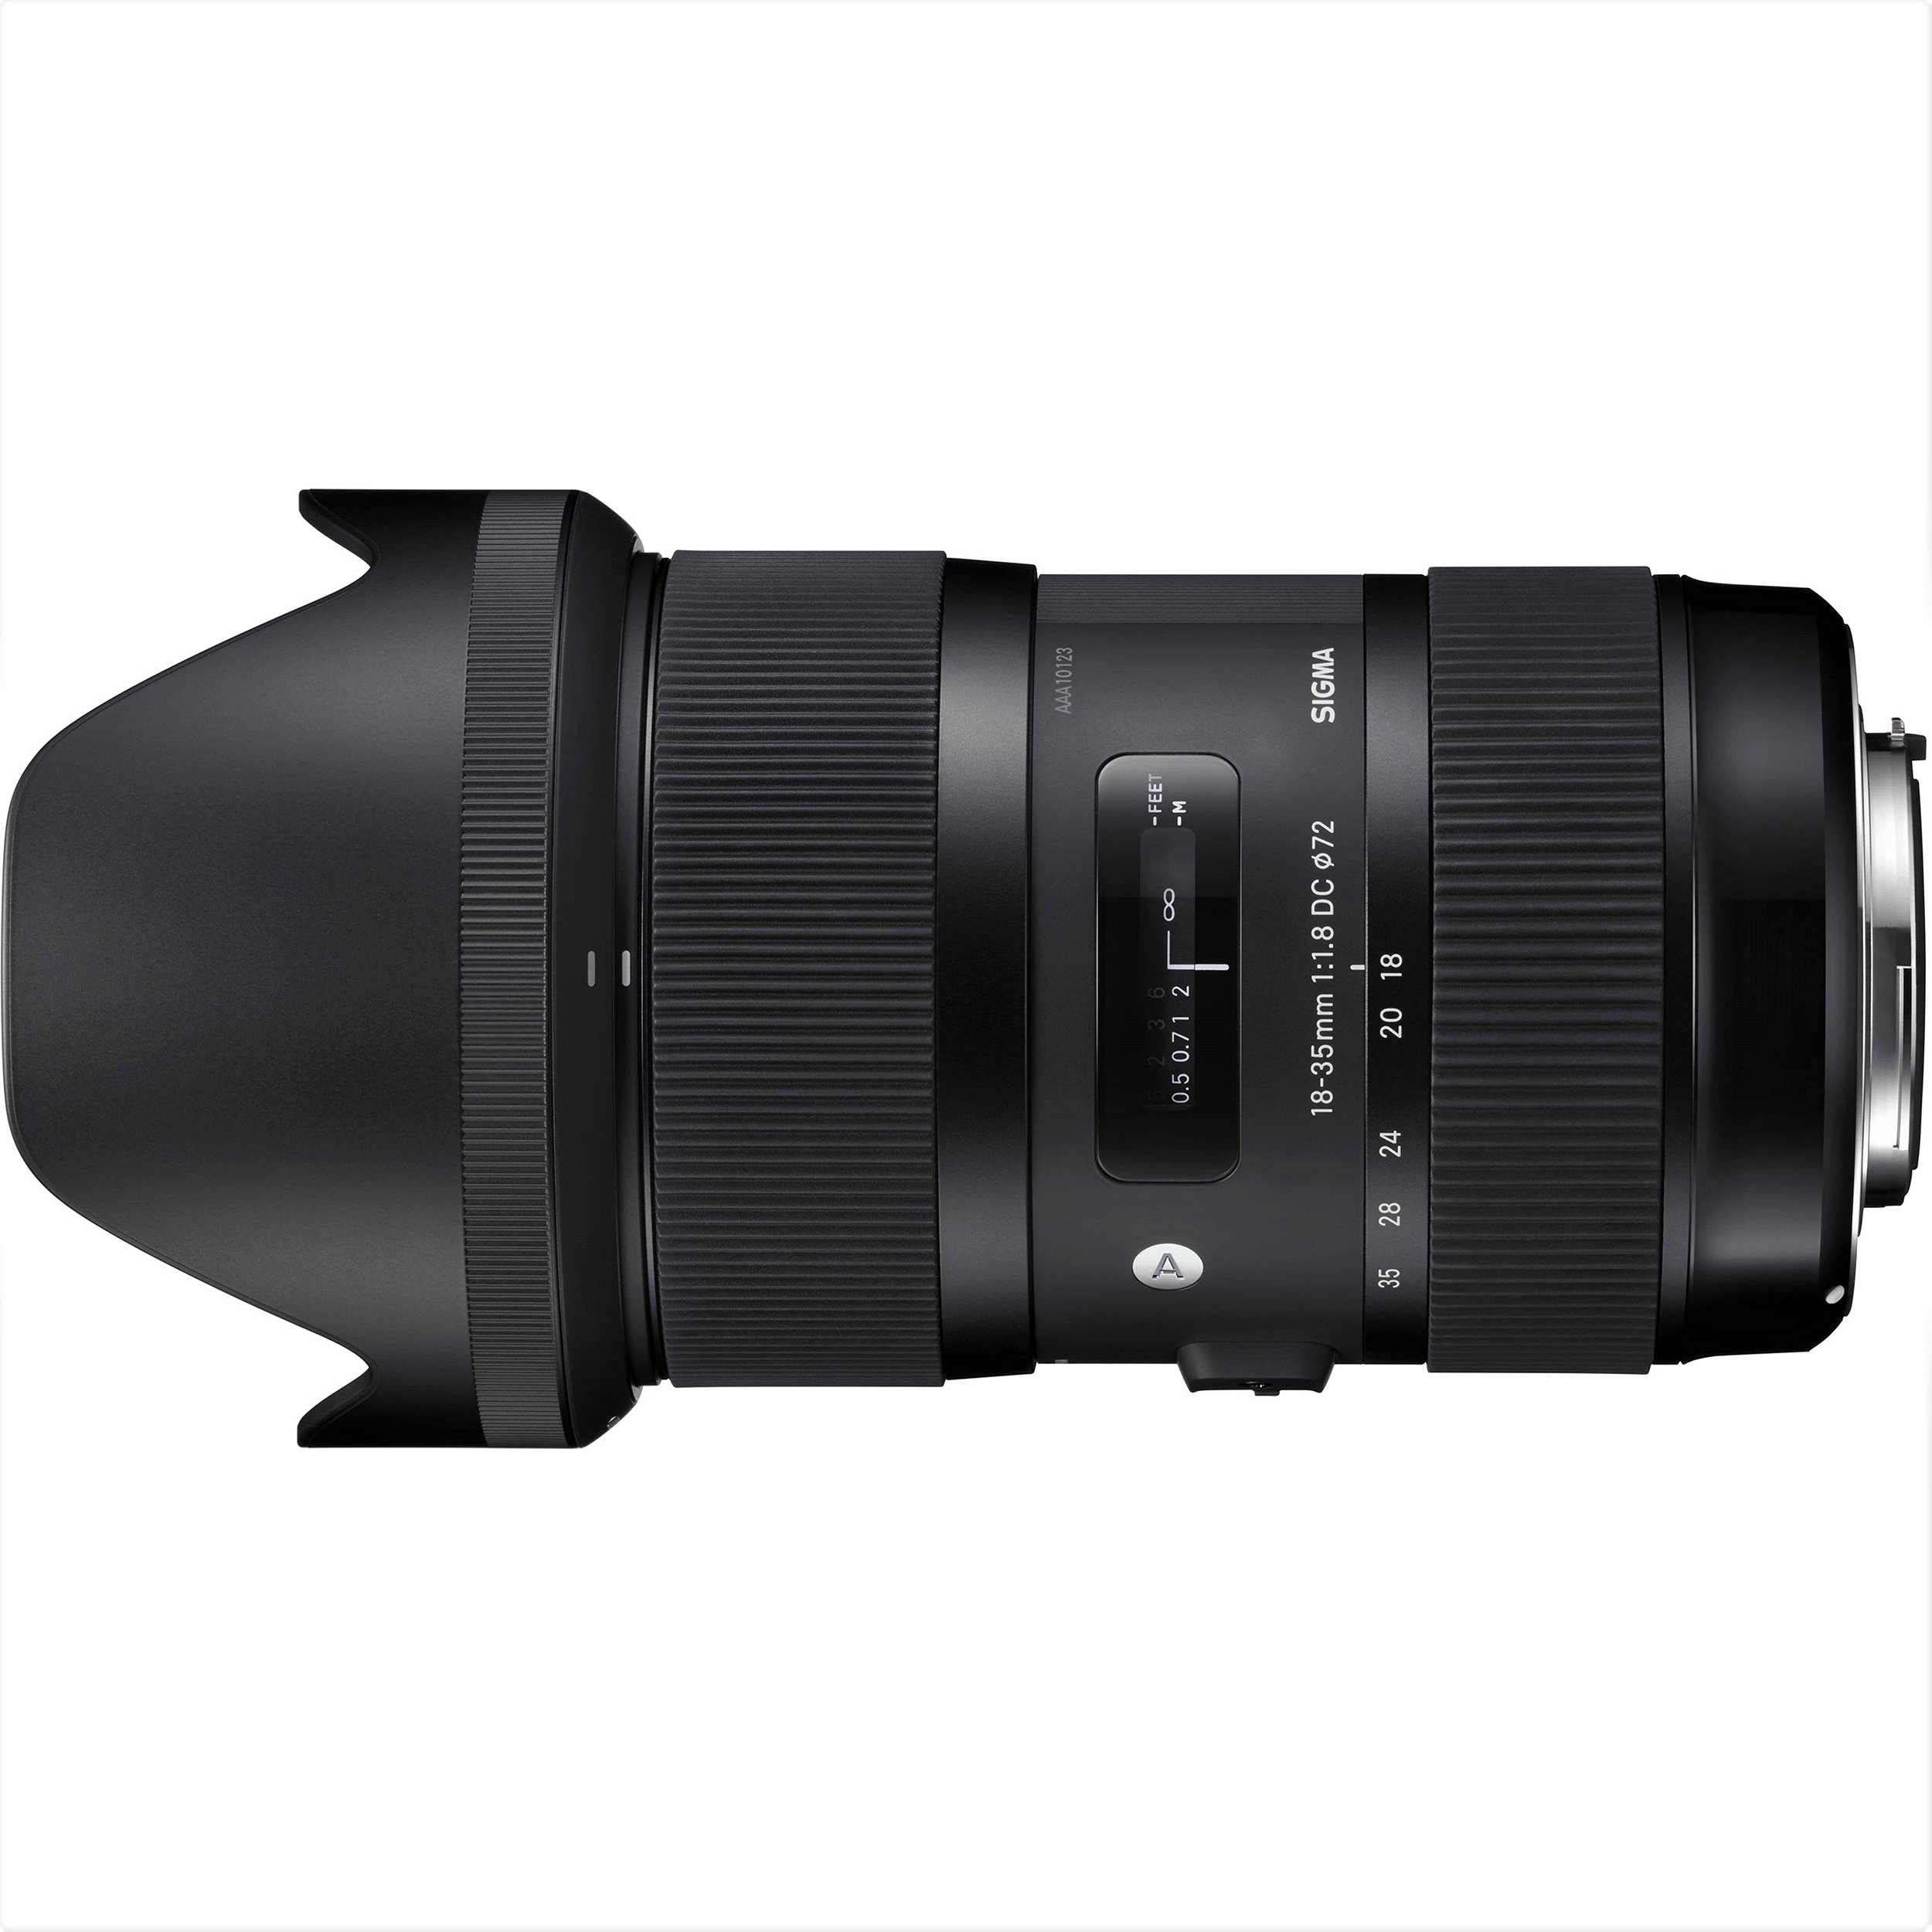 Sigma 18-35mm f/1.8 DC HSM Art Lens for Sigma SA - Side View